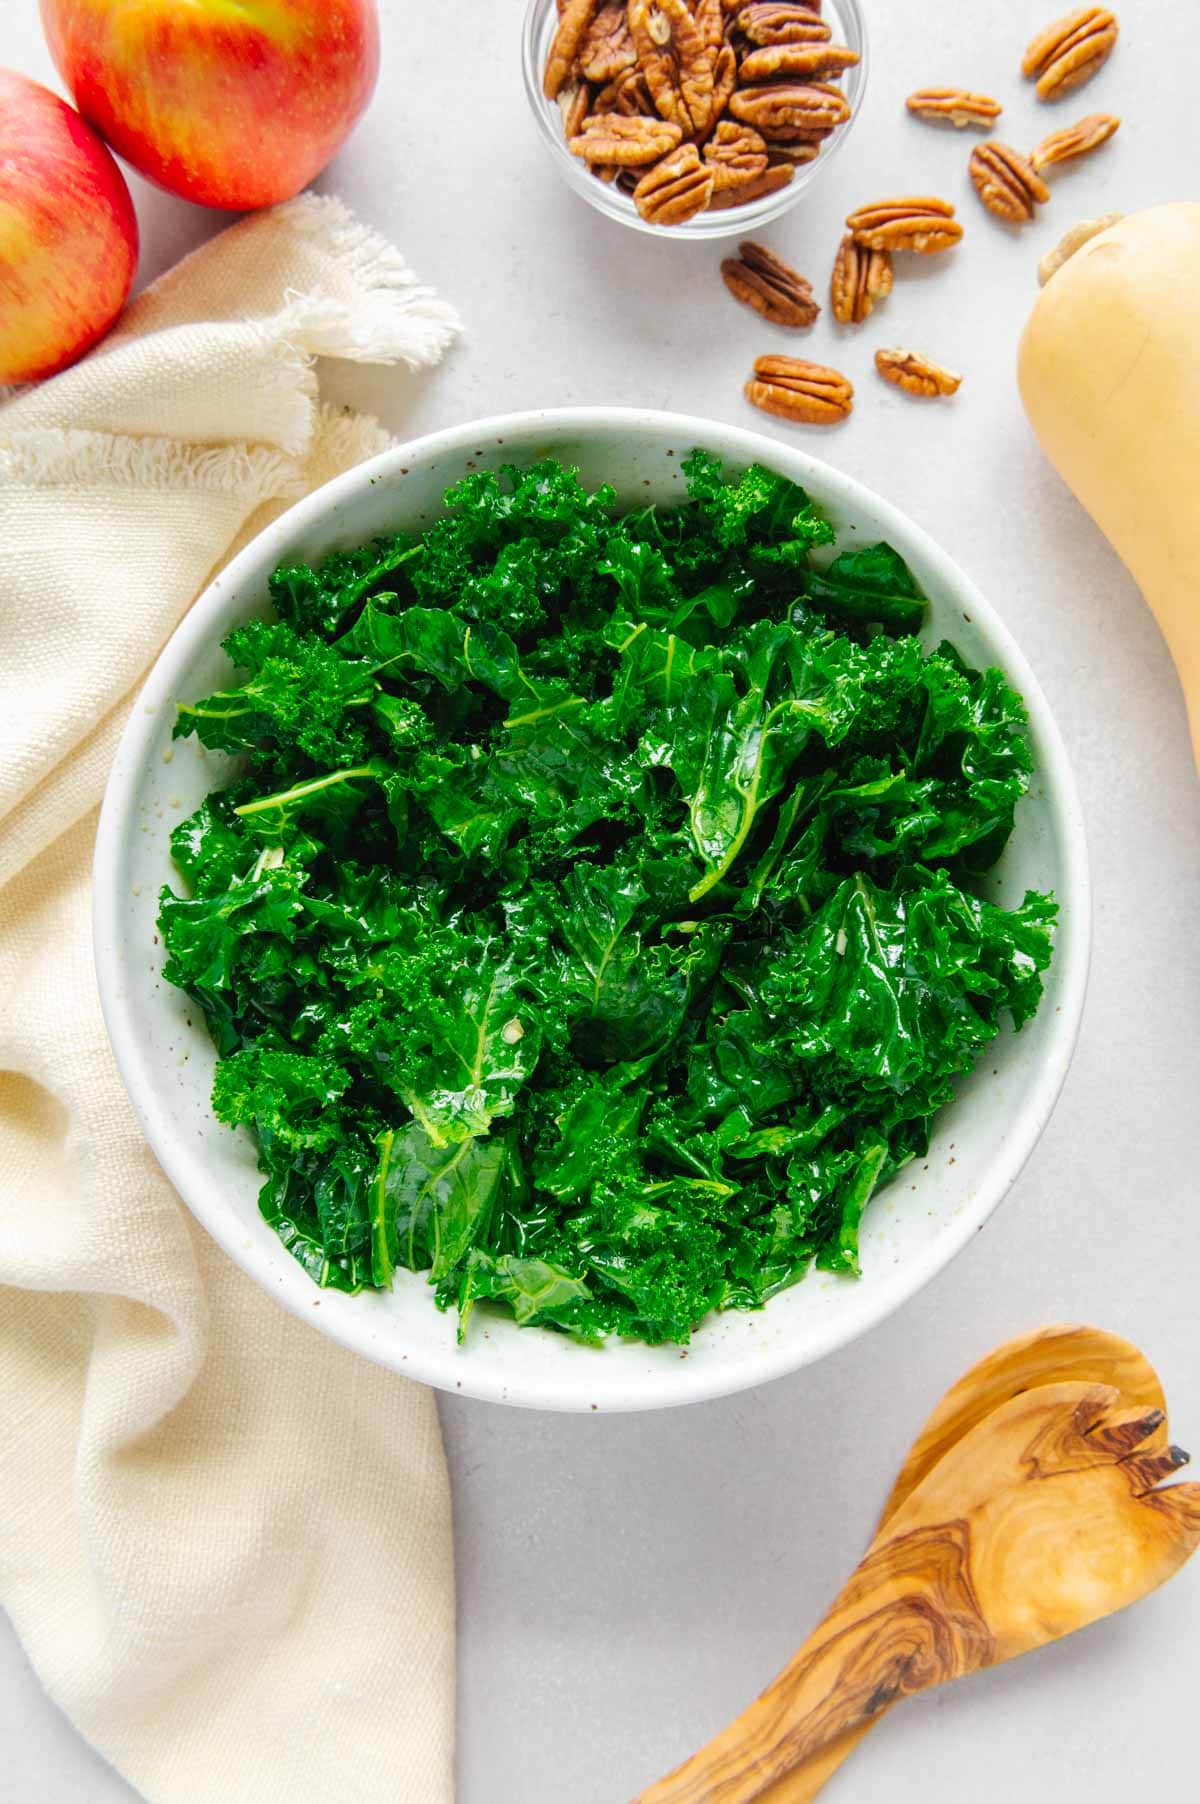 Marinated curly kale in a serving bowl.